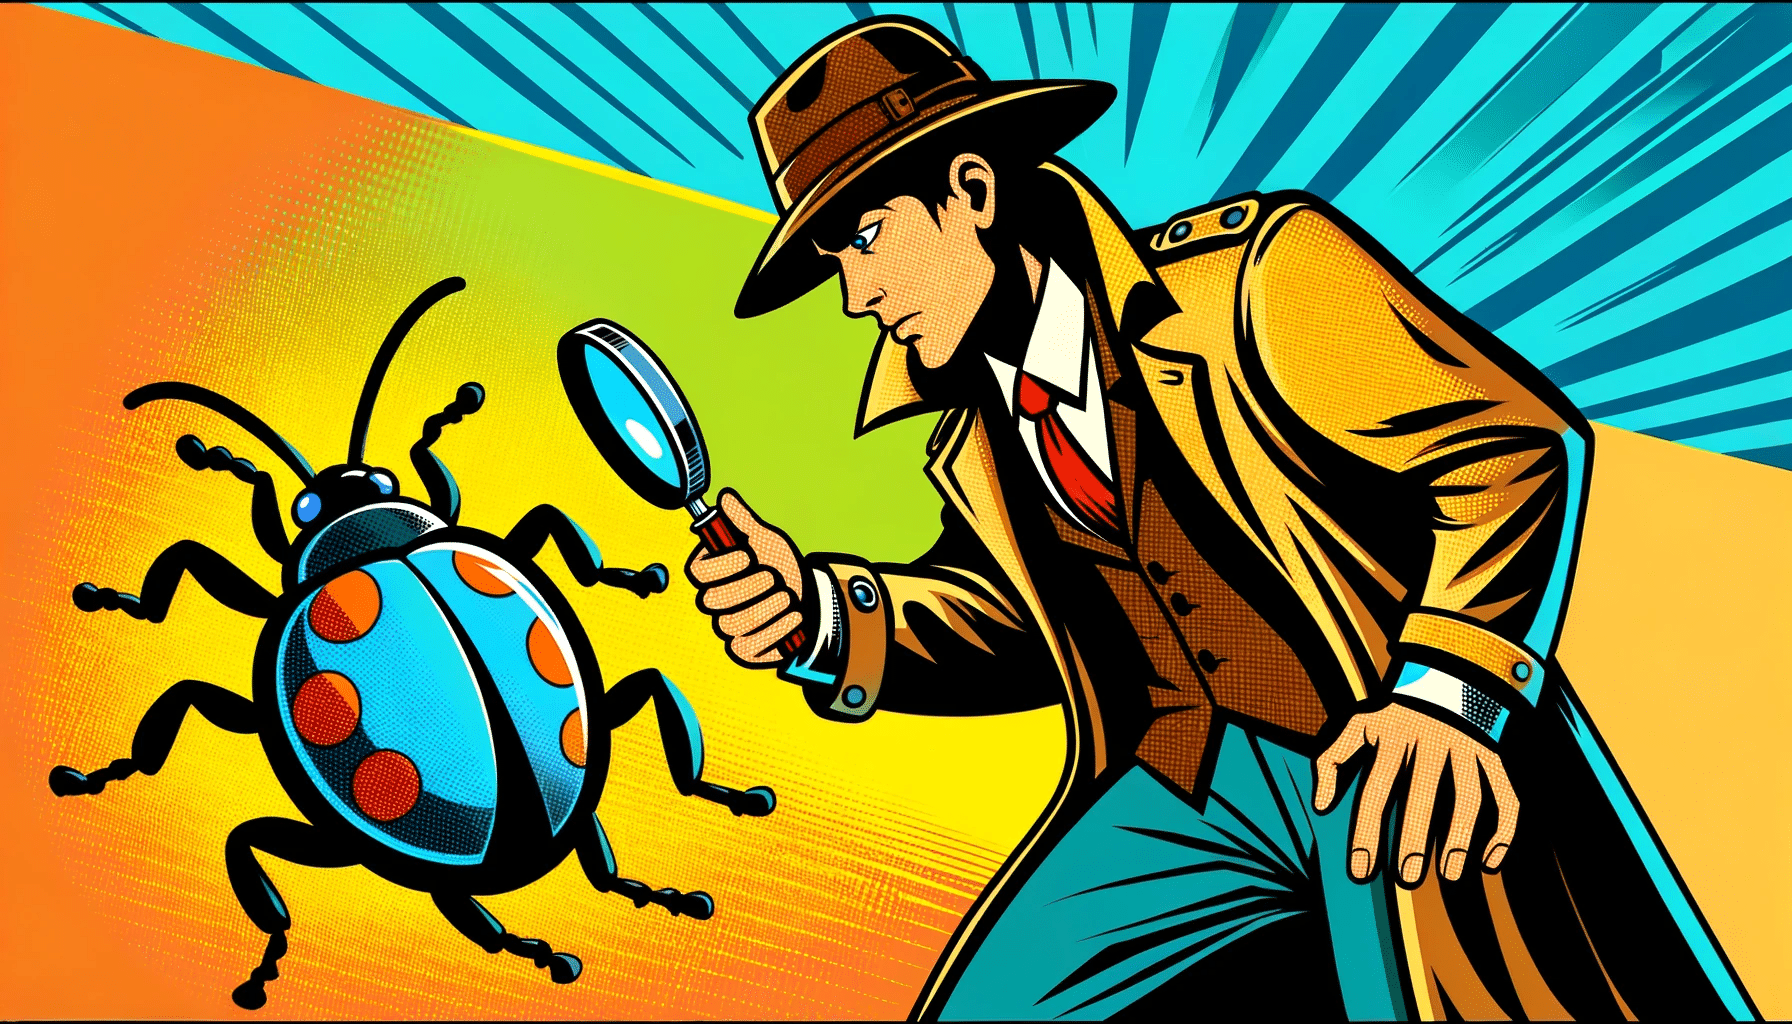 Vulnerability Scanning for Bugs